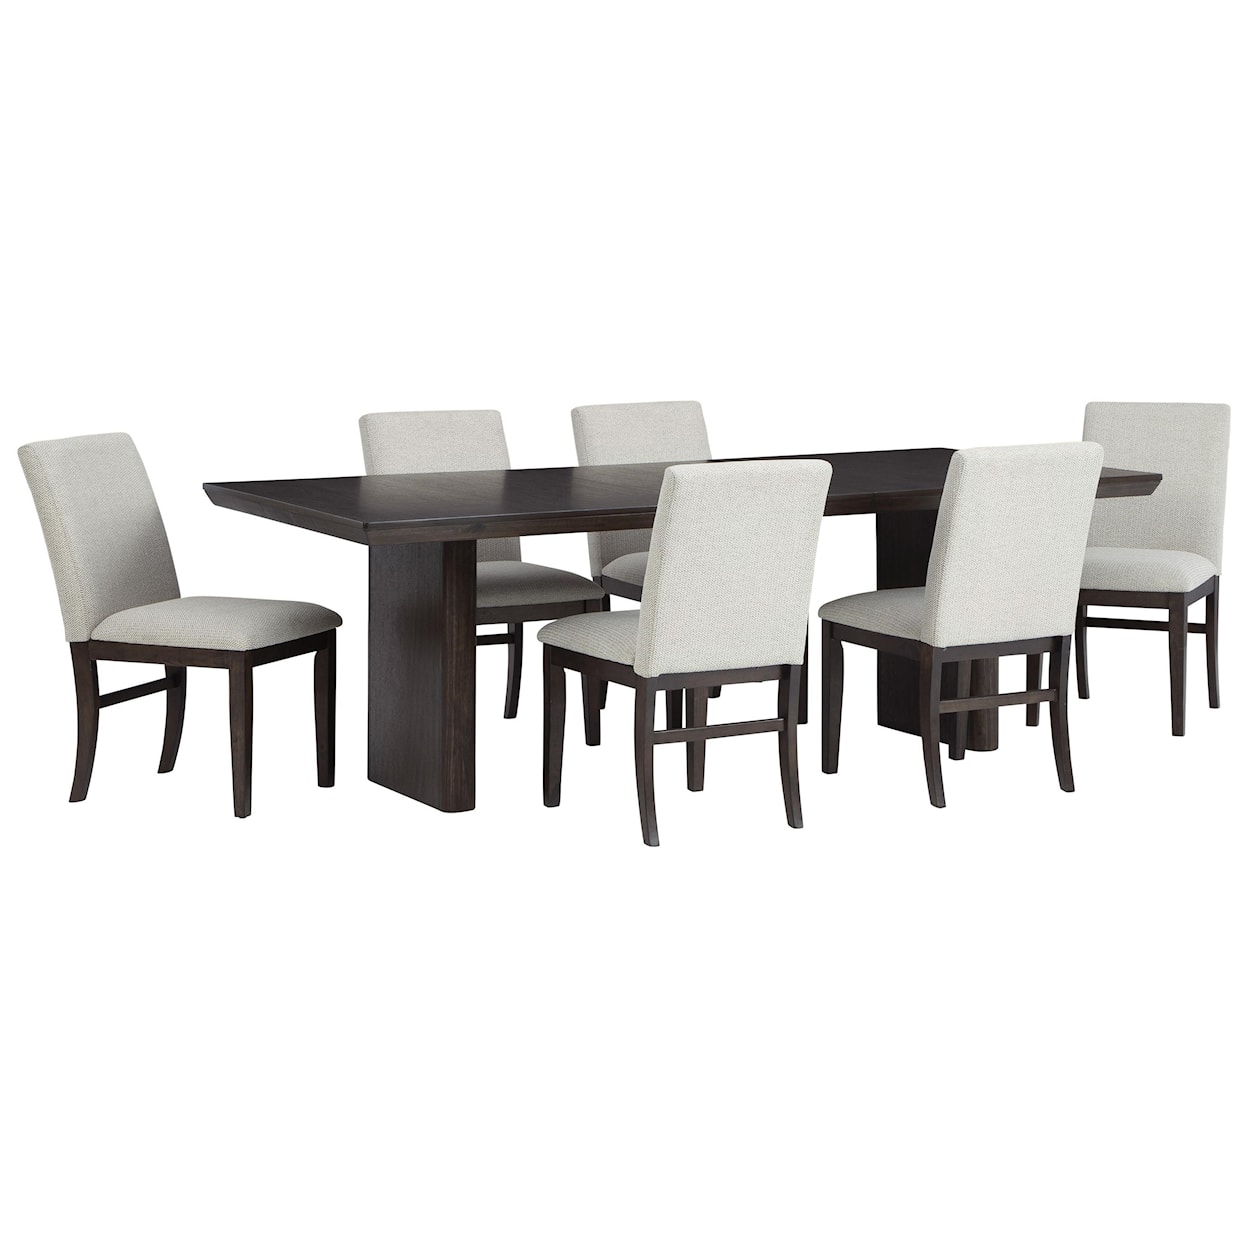 Millennium Bruxworth 9 Piece Dining Room Set with 8 Side Chairs